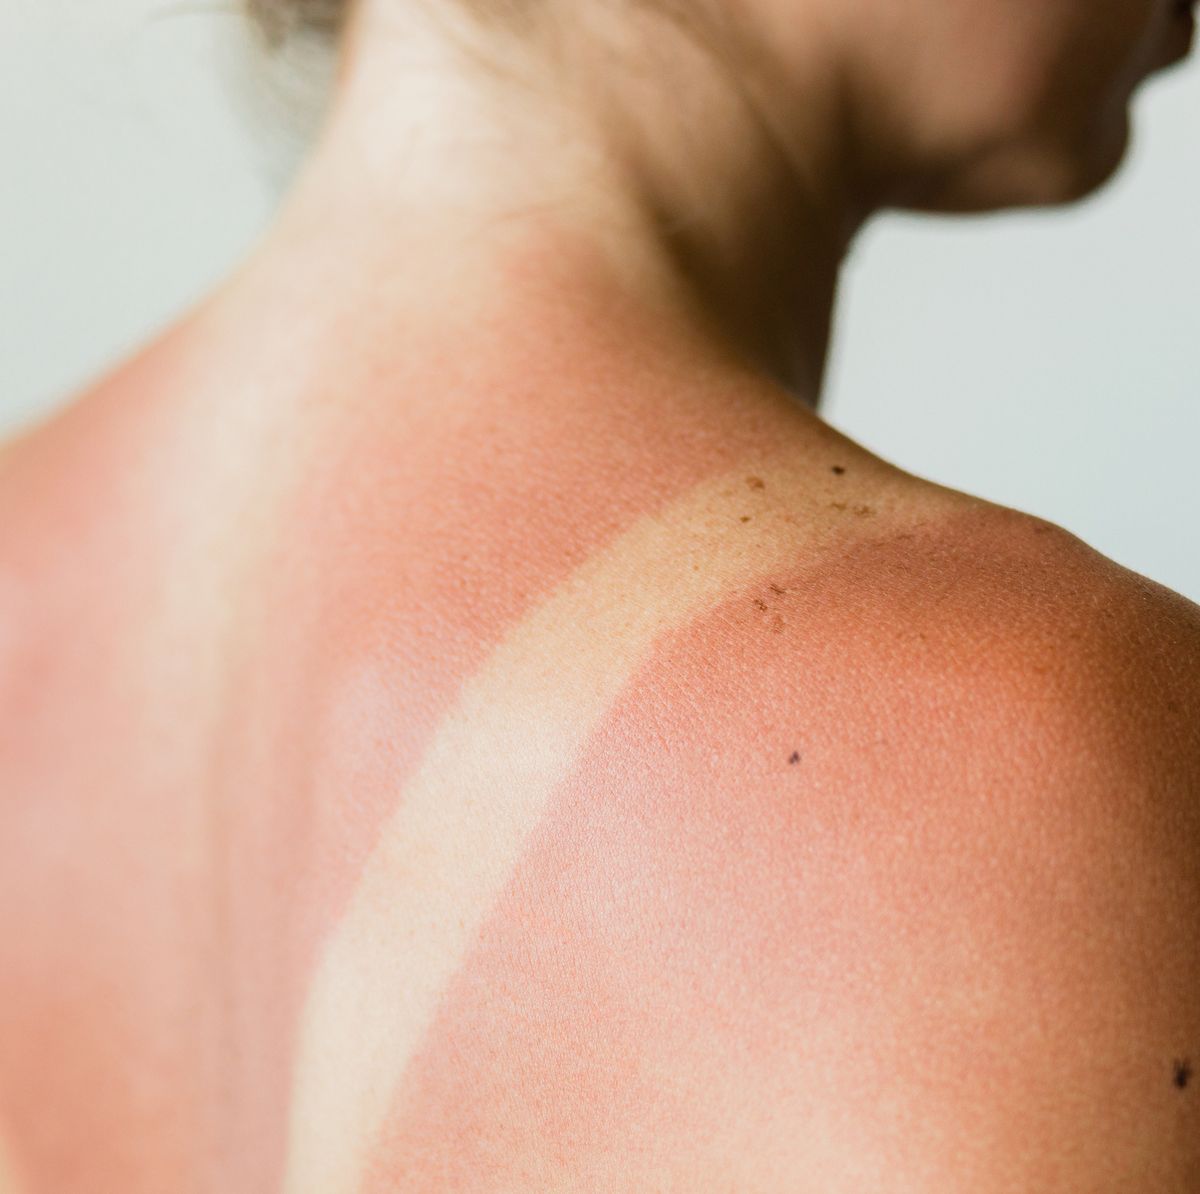 17 Sunburn Cures for Instant Relief - How to Get Rid of Sunburn Fast